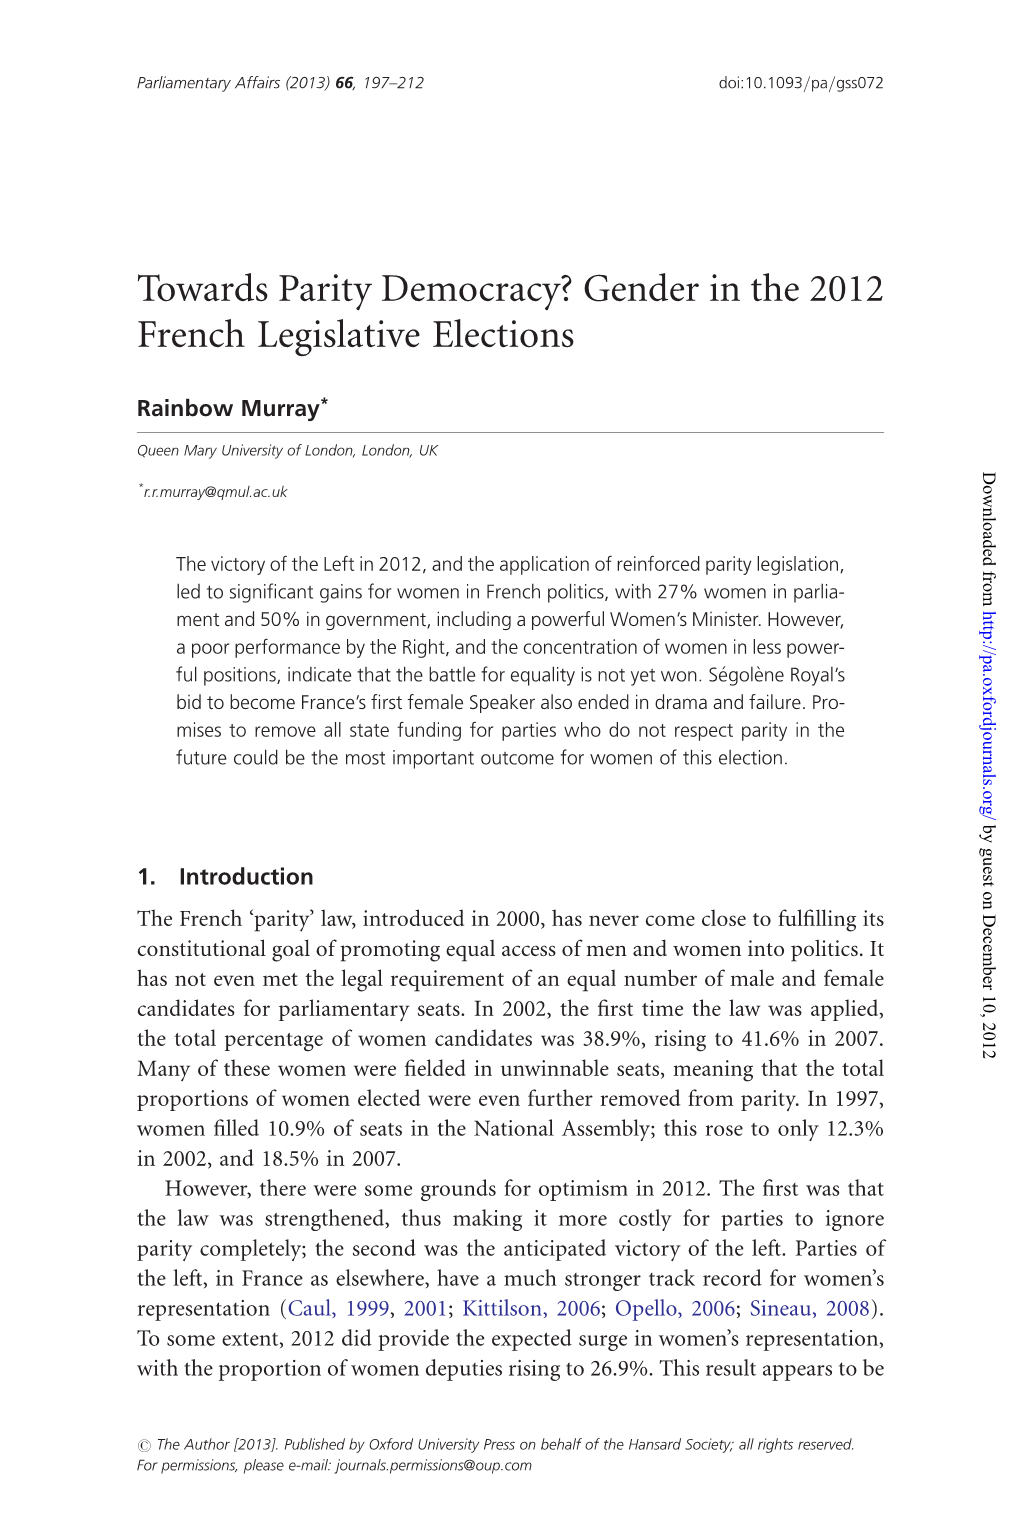 Towards Parity Democracy? Gender in the 2012 French Legislative Elections